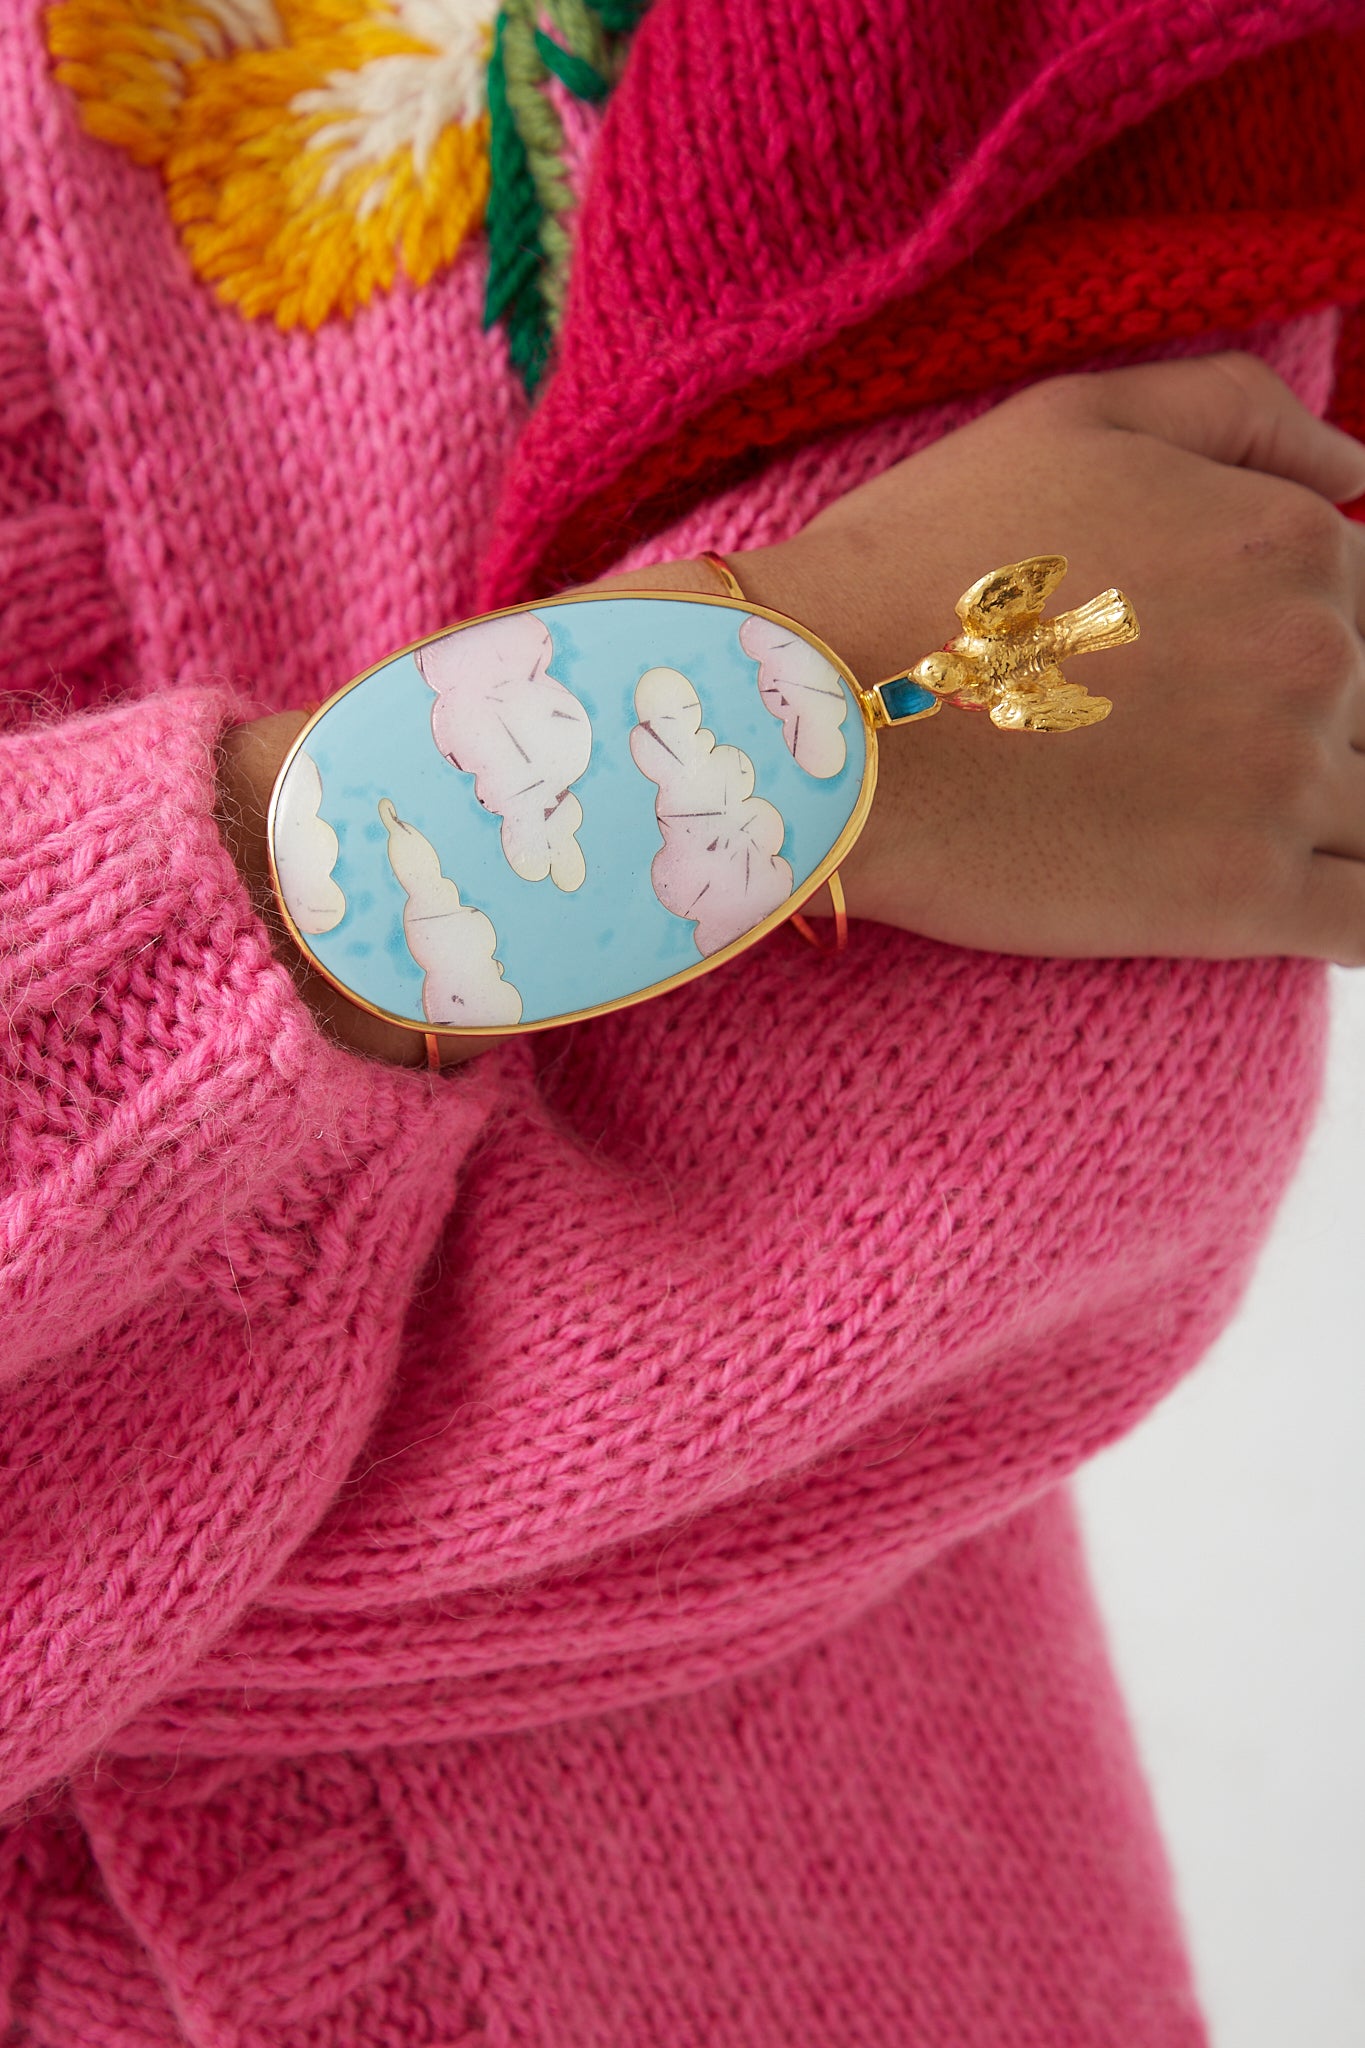 A woman wearing a pink sweater with a blue and white cuff accessorized with a Sofio Gongli Bracelet in Clouds with Bird.